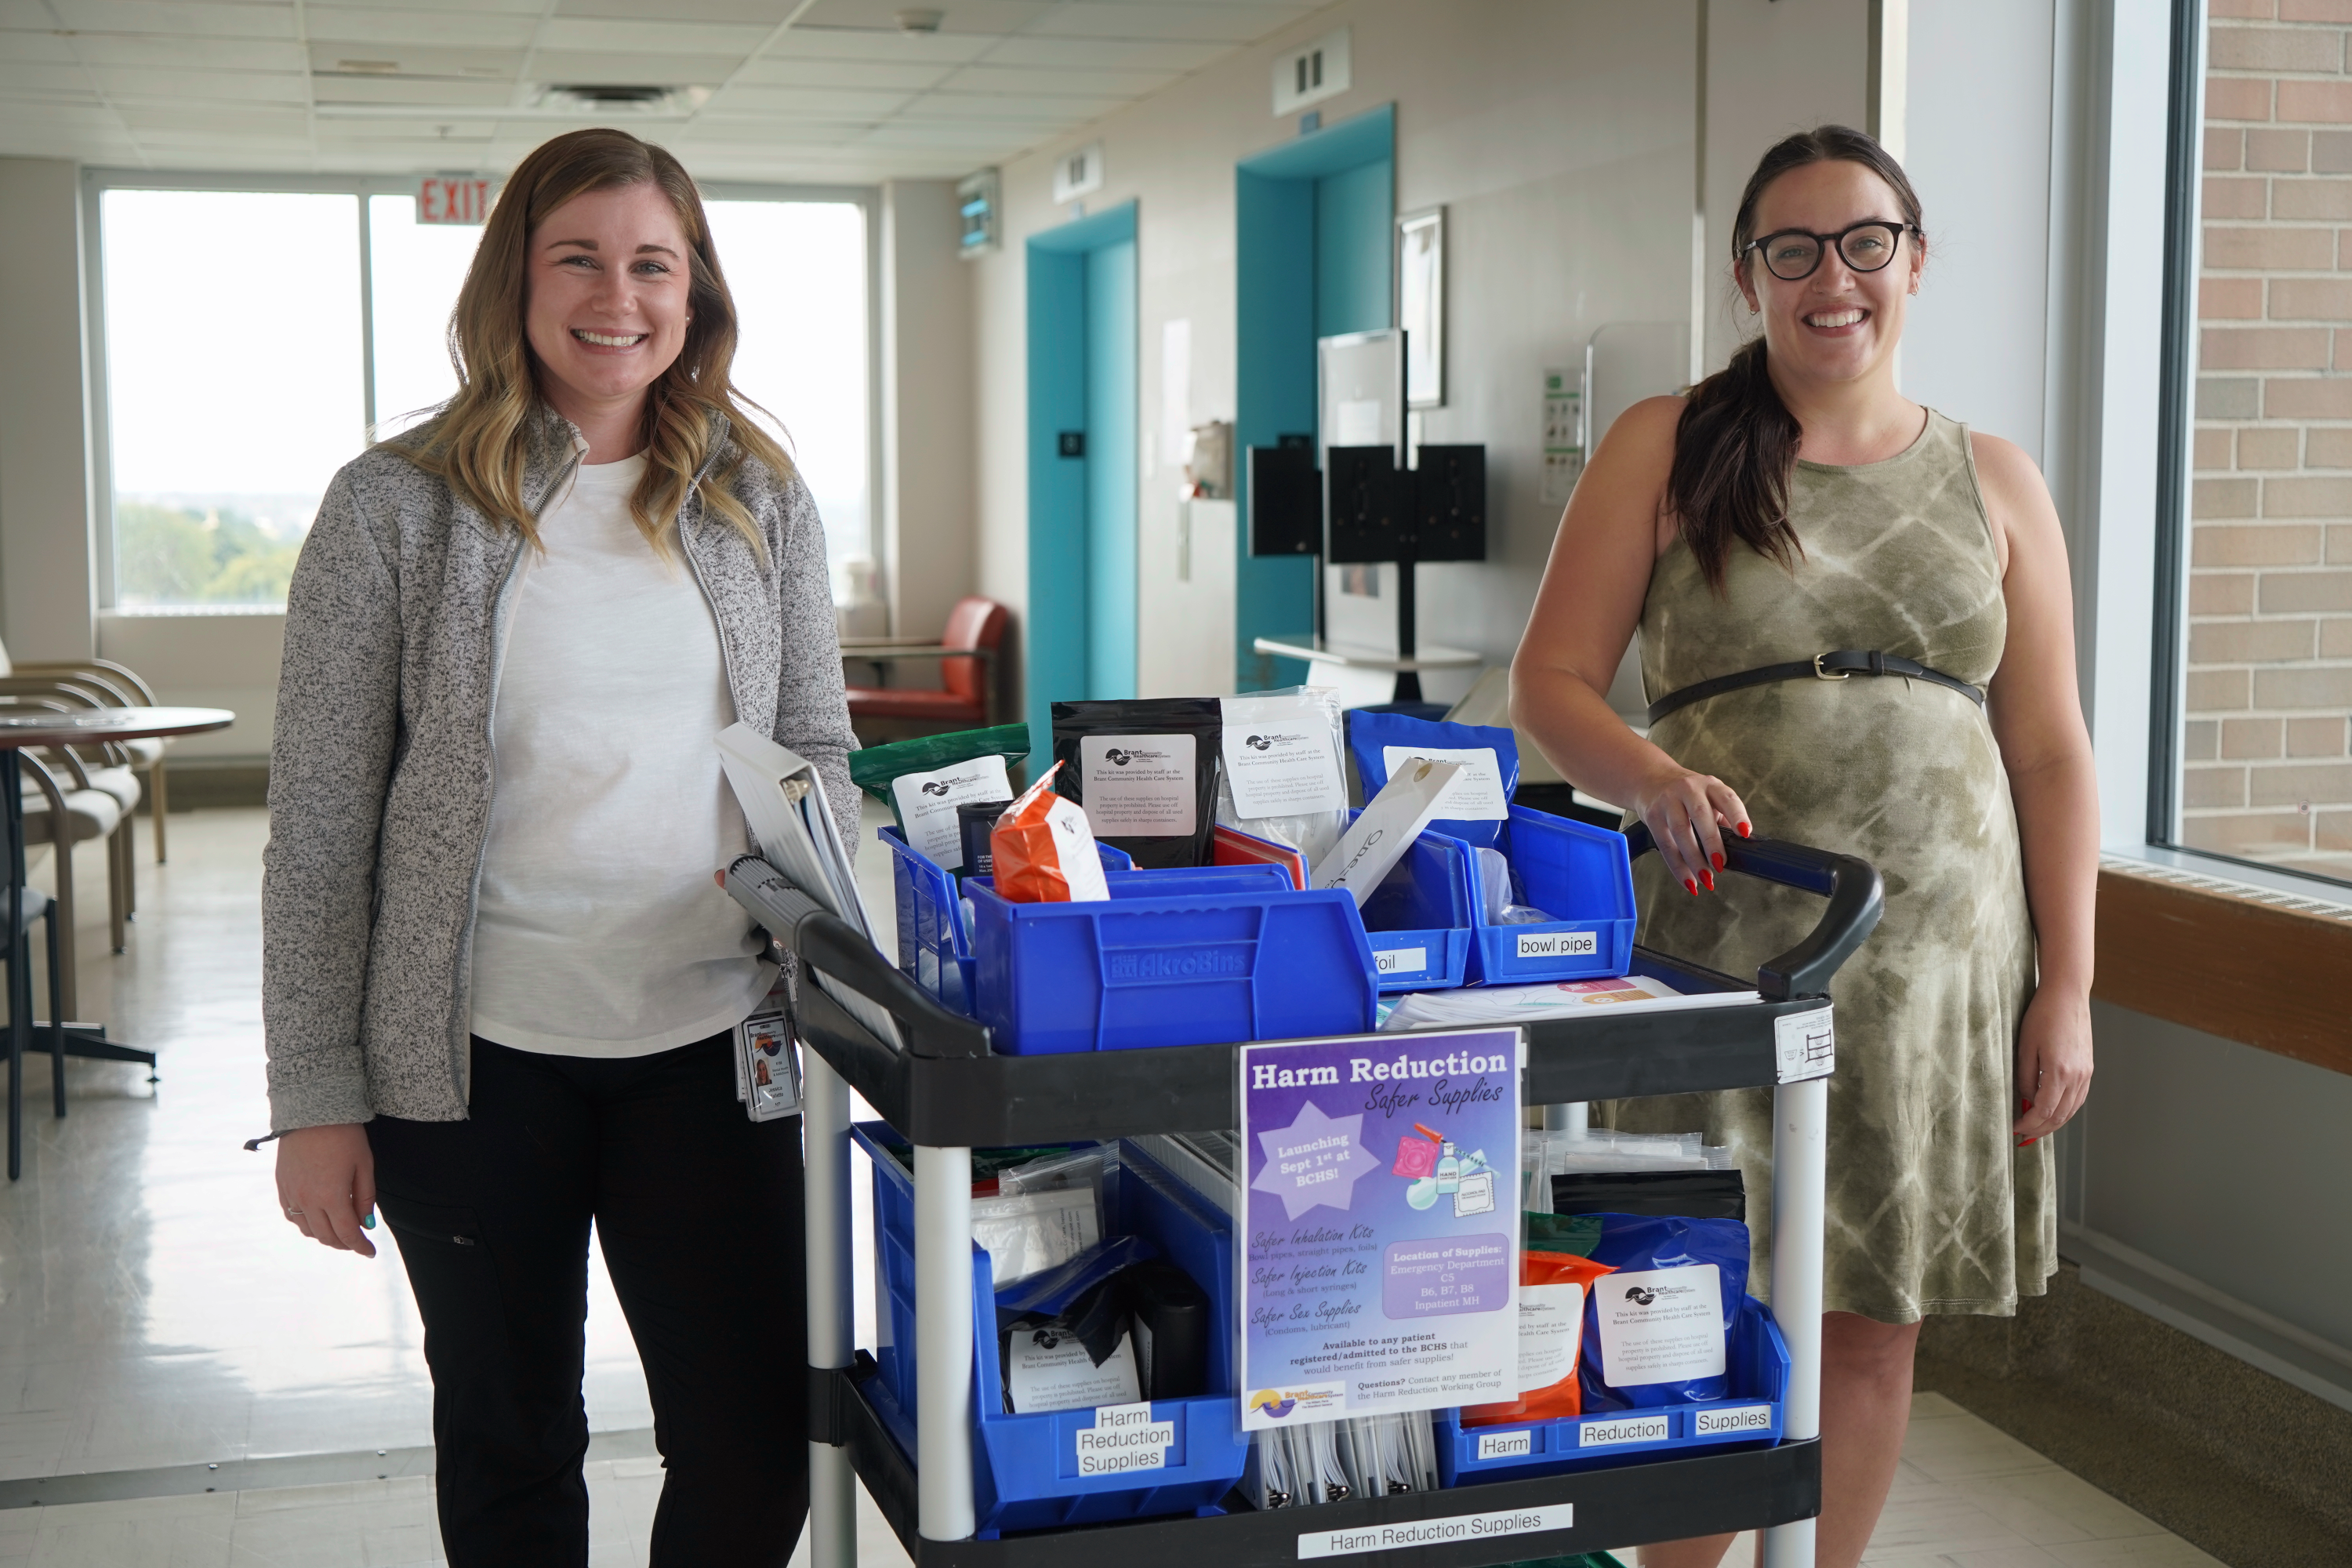 Jessica Mallette and Alana Willemsma with their harm reduction safer supplies cart